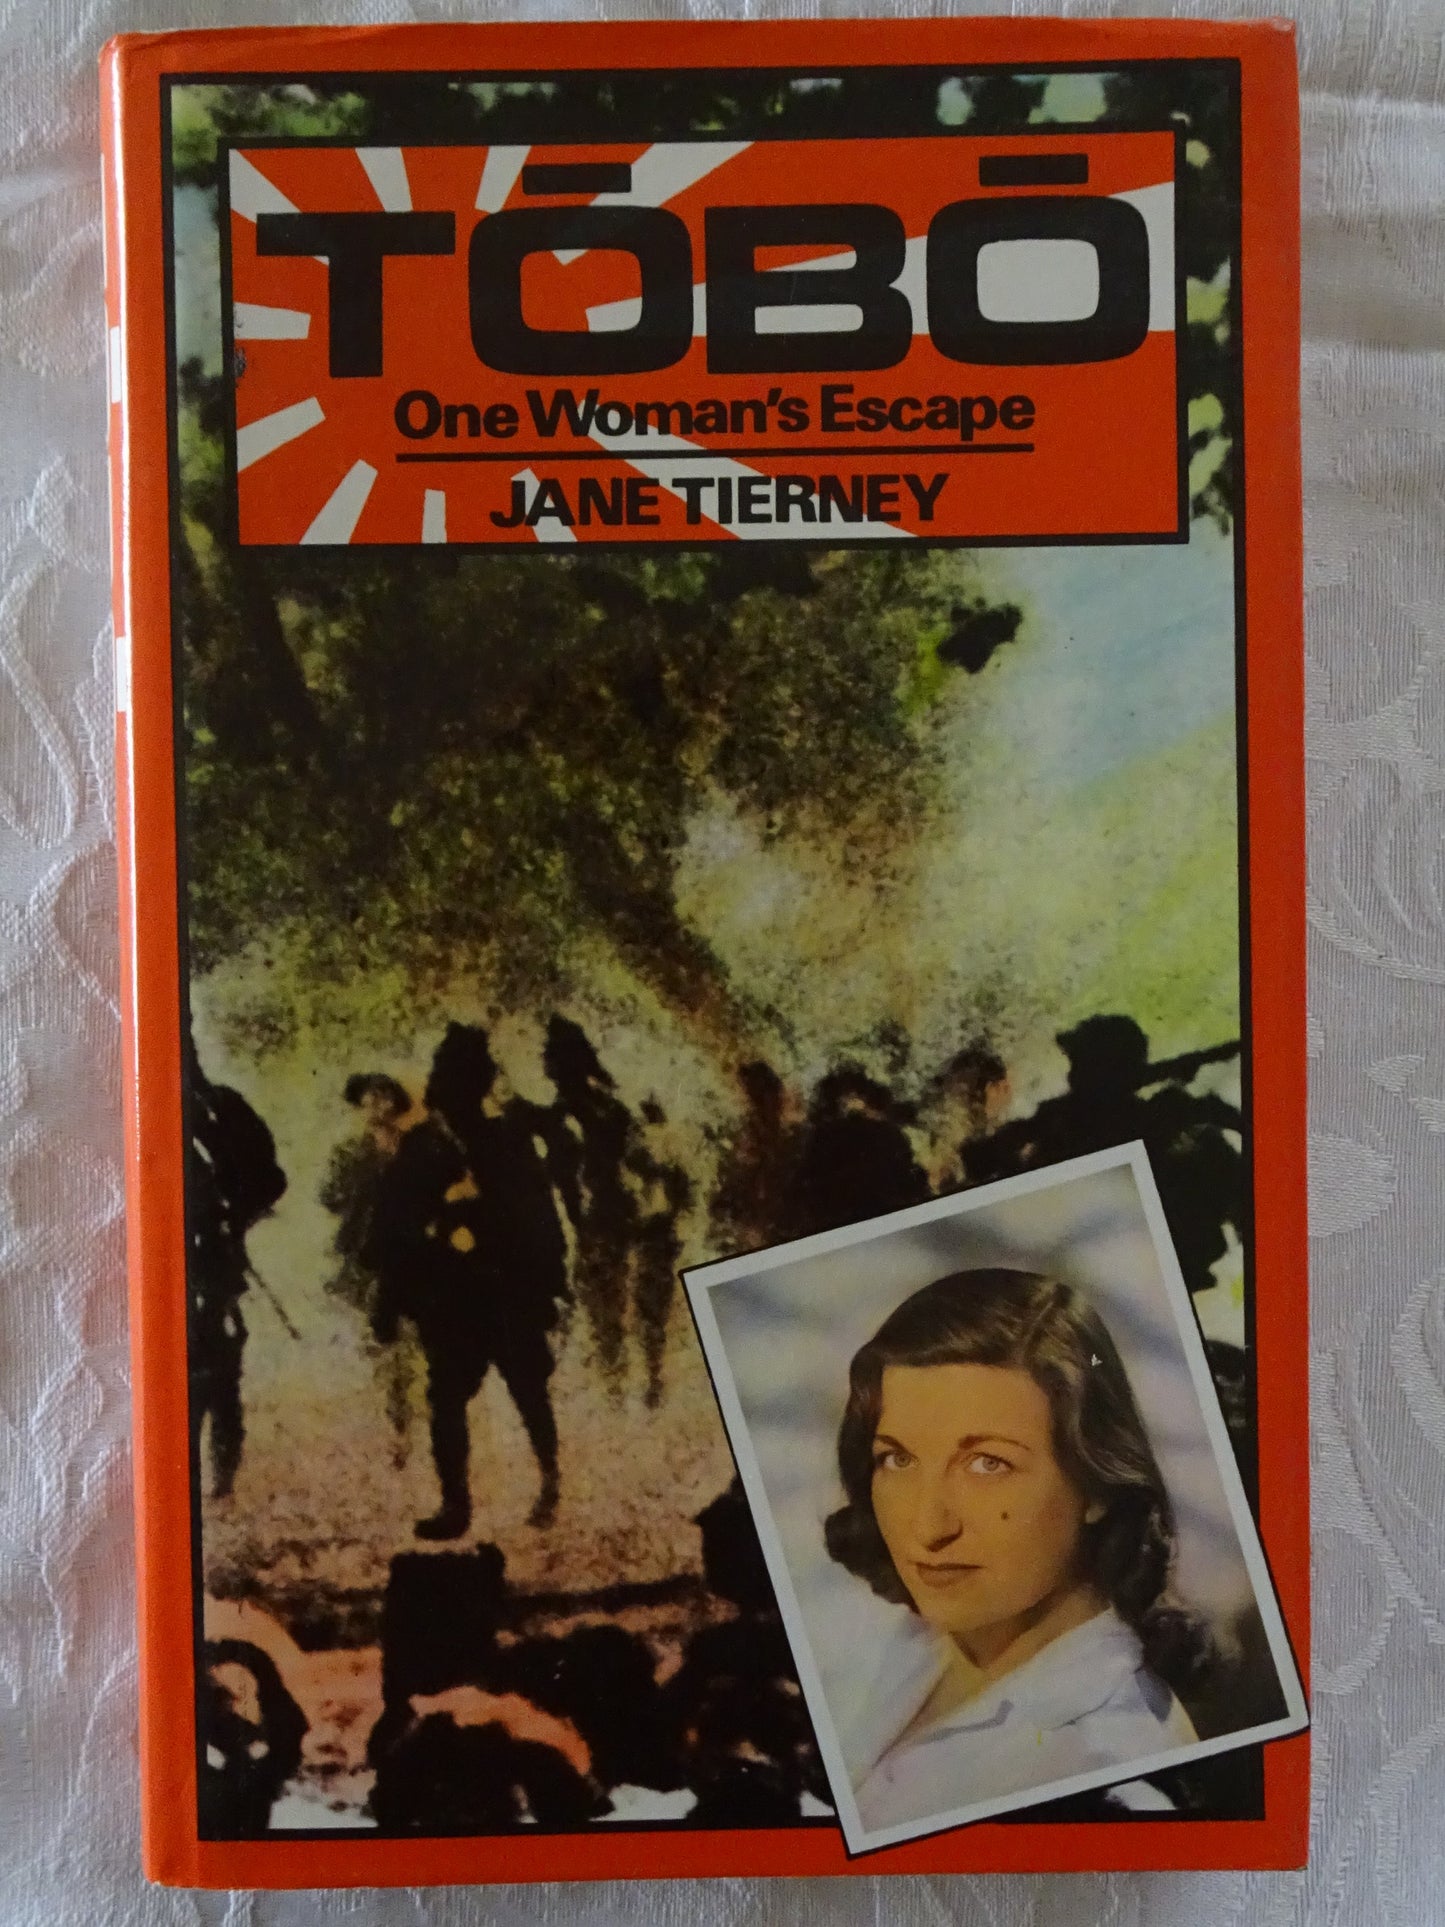 TOBO One Woman's Escape by Jane Tierney